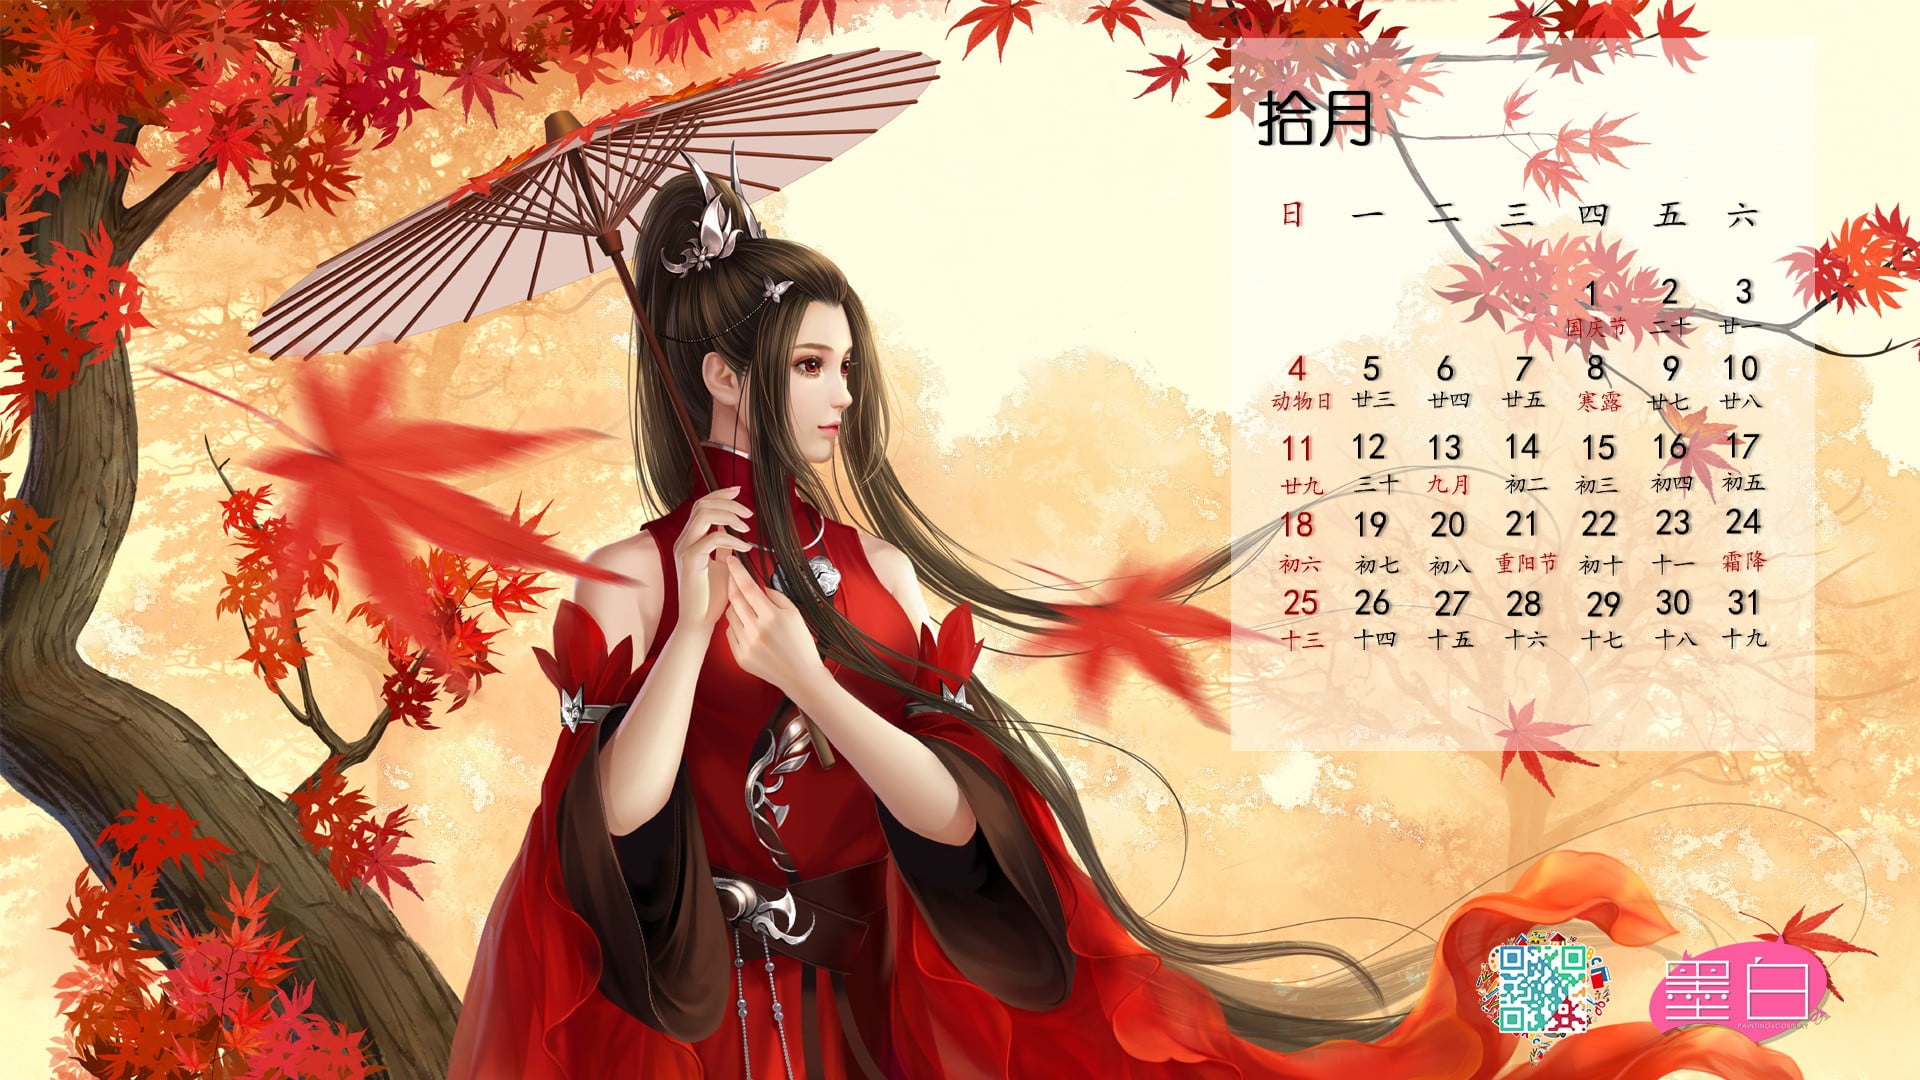 Asian, calendar, october, flowers, Chinese dress, one person